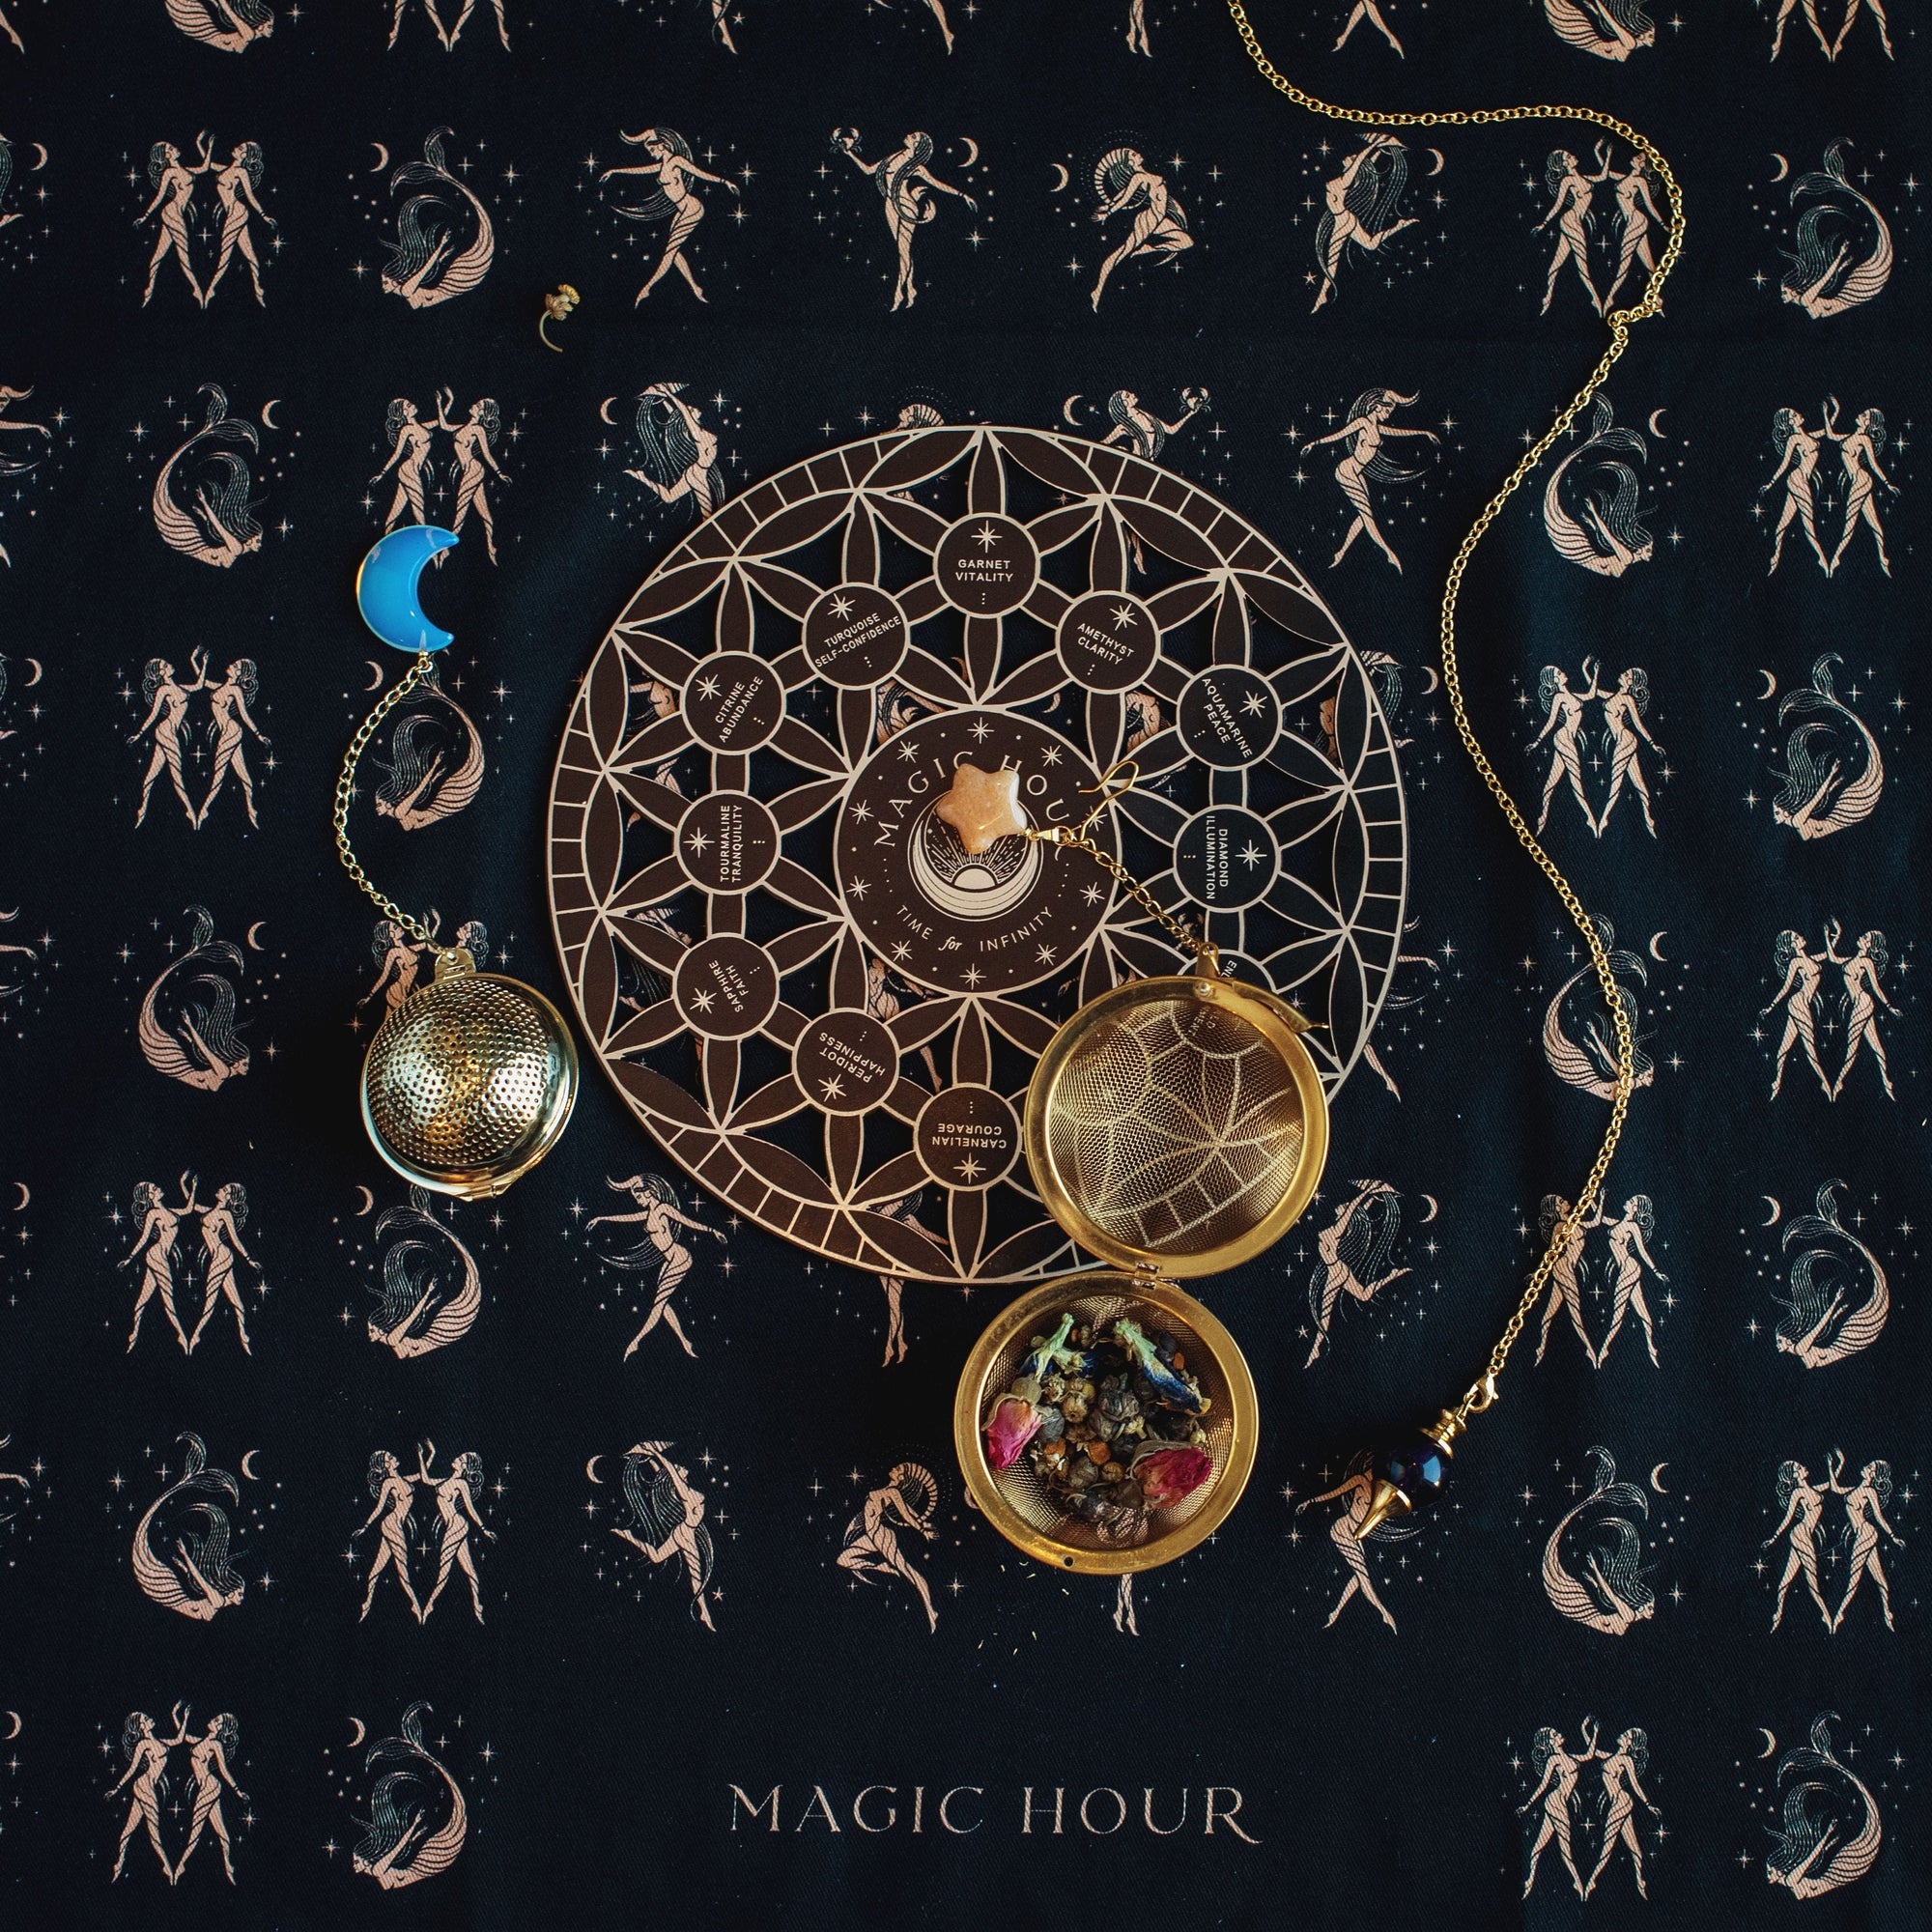 A circular astrological chart with phases of the moon, symbols, a small bowl filled with colorful gemstones, a metallic pendant, and a crescent moon decoration are laid on a fabric with an intricate starry pattern. &quot;Crystal Grid: Flower of Life Tea Ceremony Altar&quot; by Alibaba is written at the bottom, hinting at an event fueled by organic tea rituals.